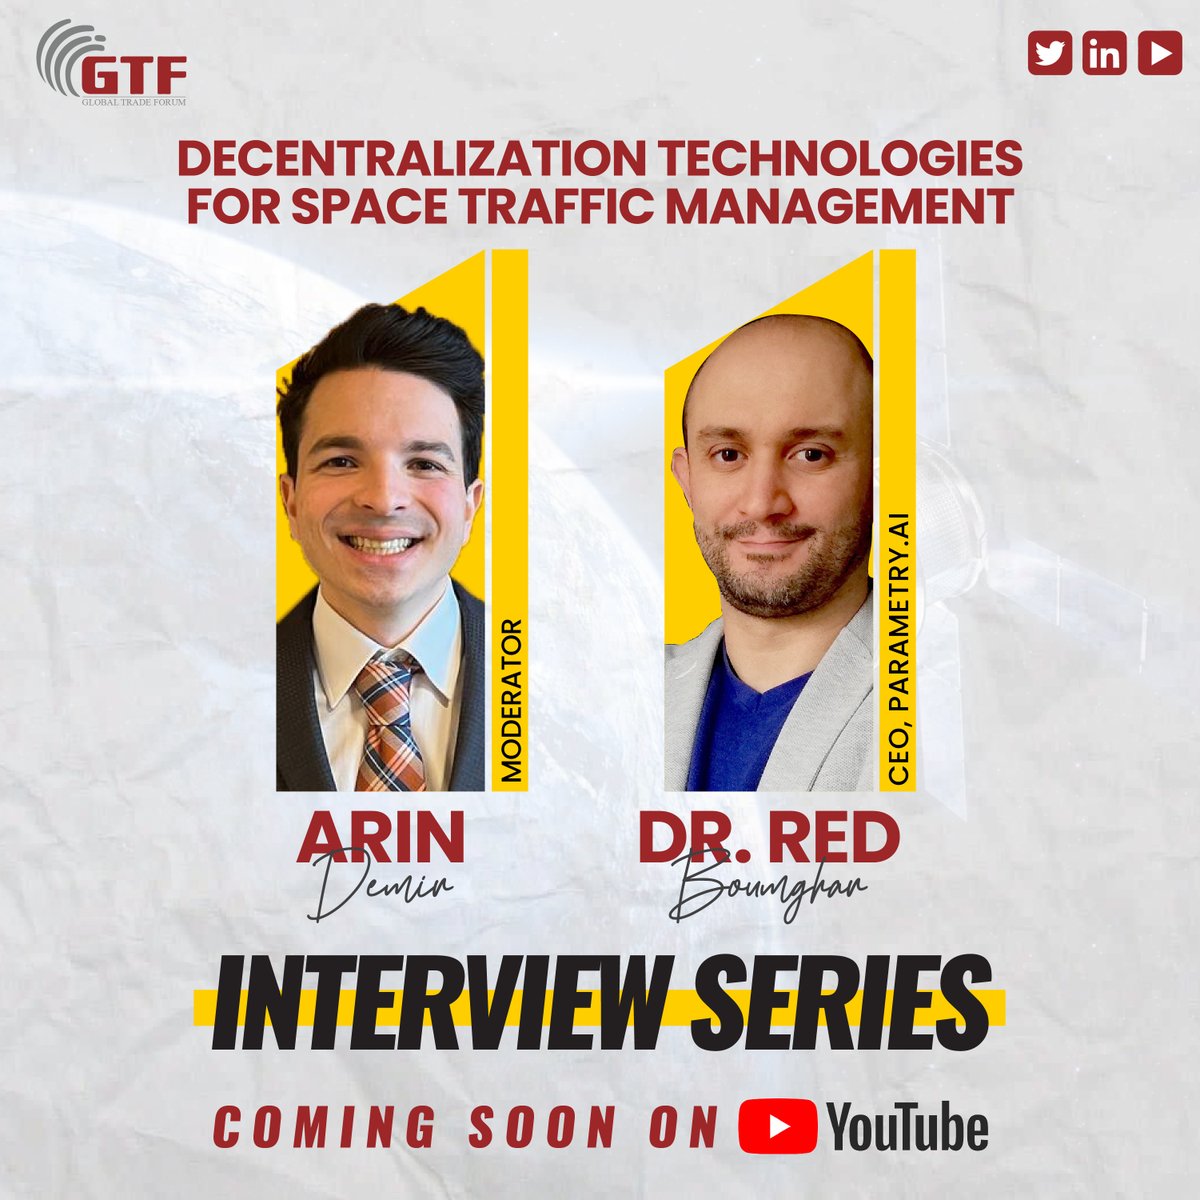 Stay tuned for the upcoming interview of DR. Red Boumghan, He will be sharing his valuable thoughts about Decentralization Technologies For Space Traffic Management with our amazing host Arin Demir, MPP.

 #interview #technology #ai #gtf #globaltradeforum #herdem #attorneysatlaw